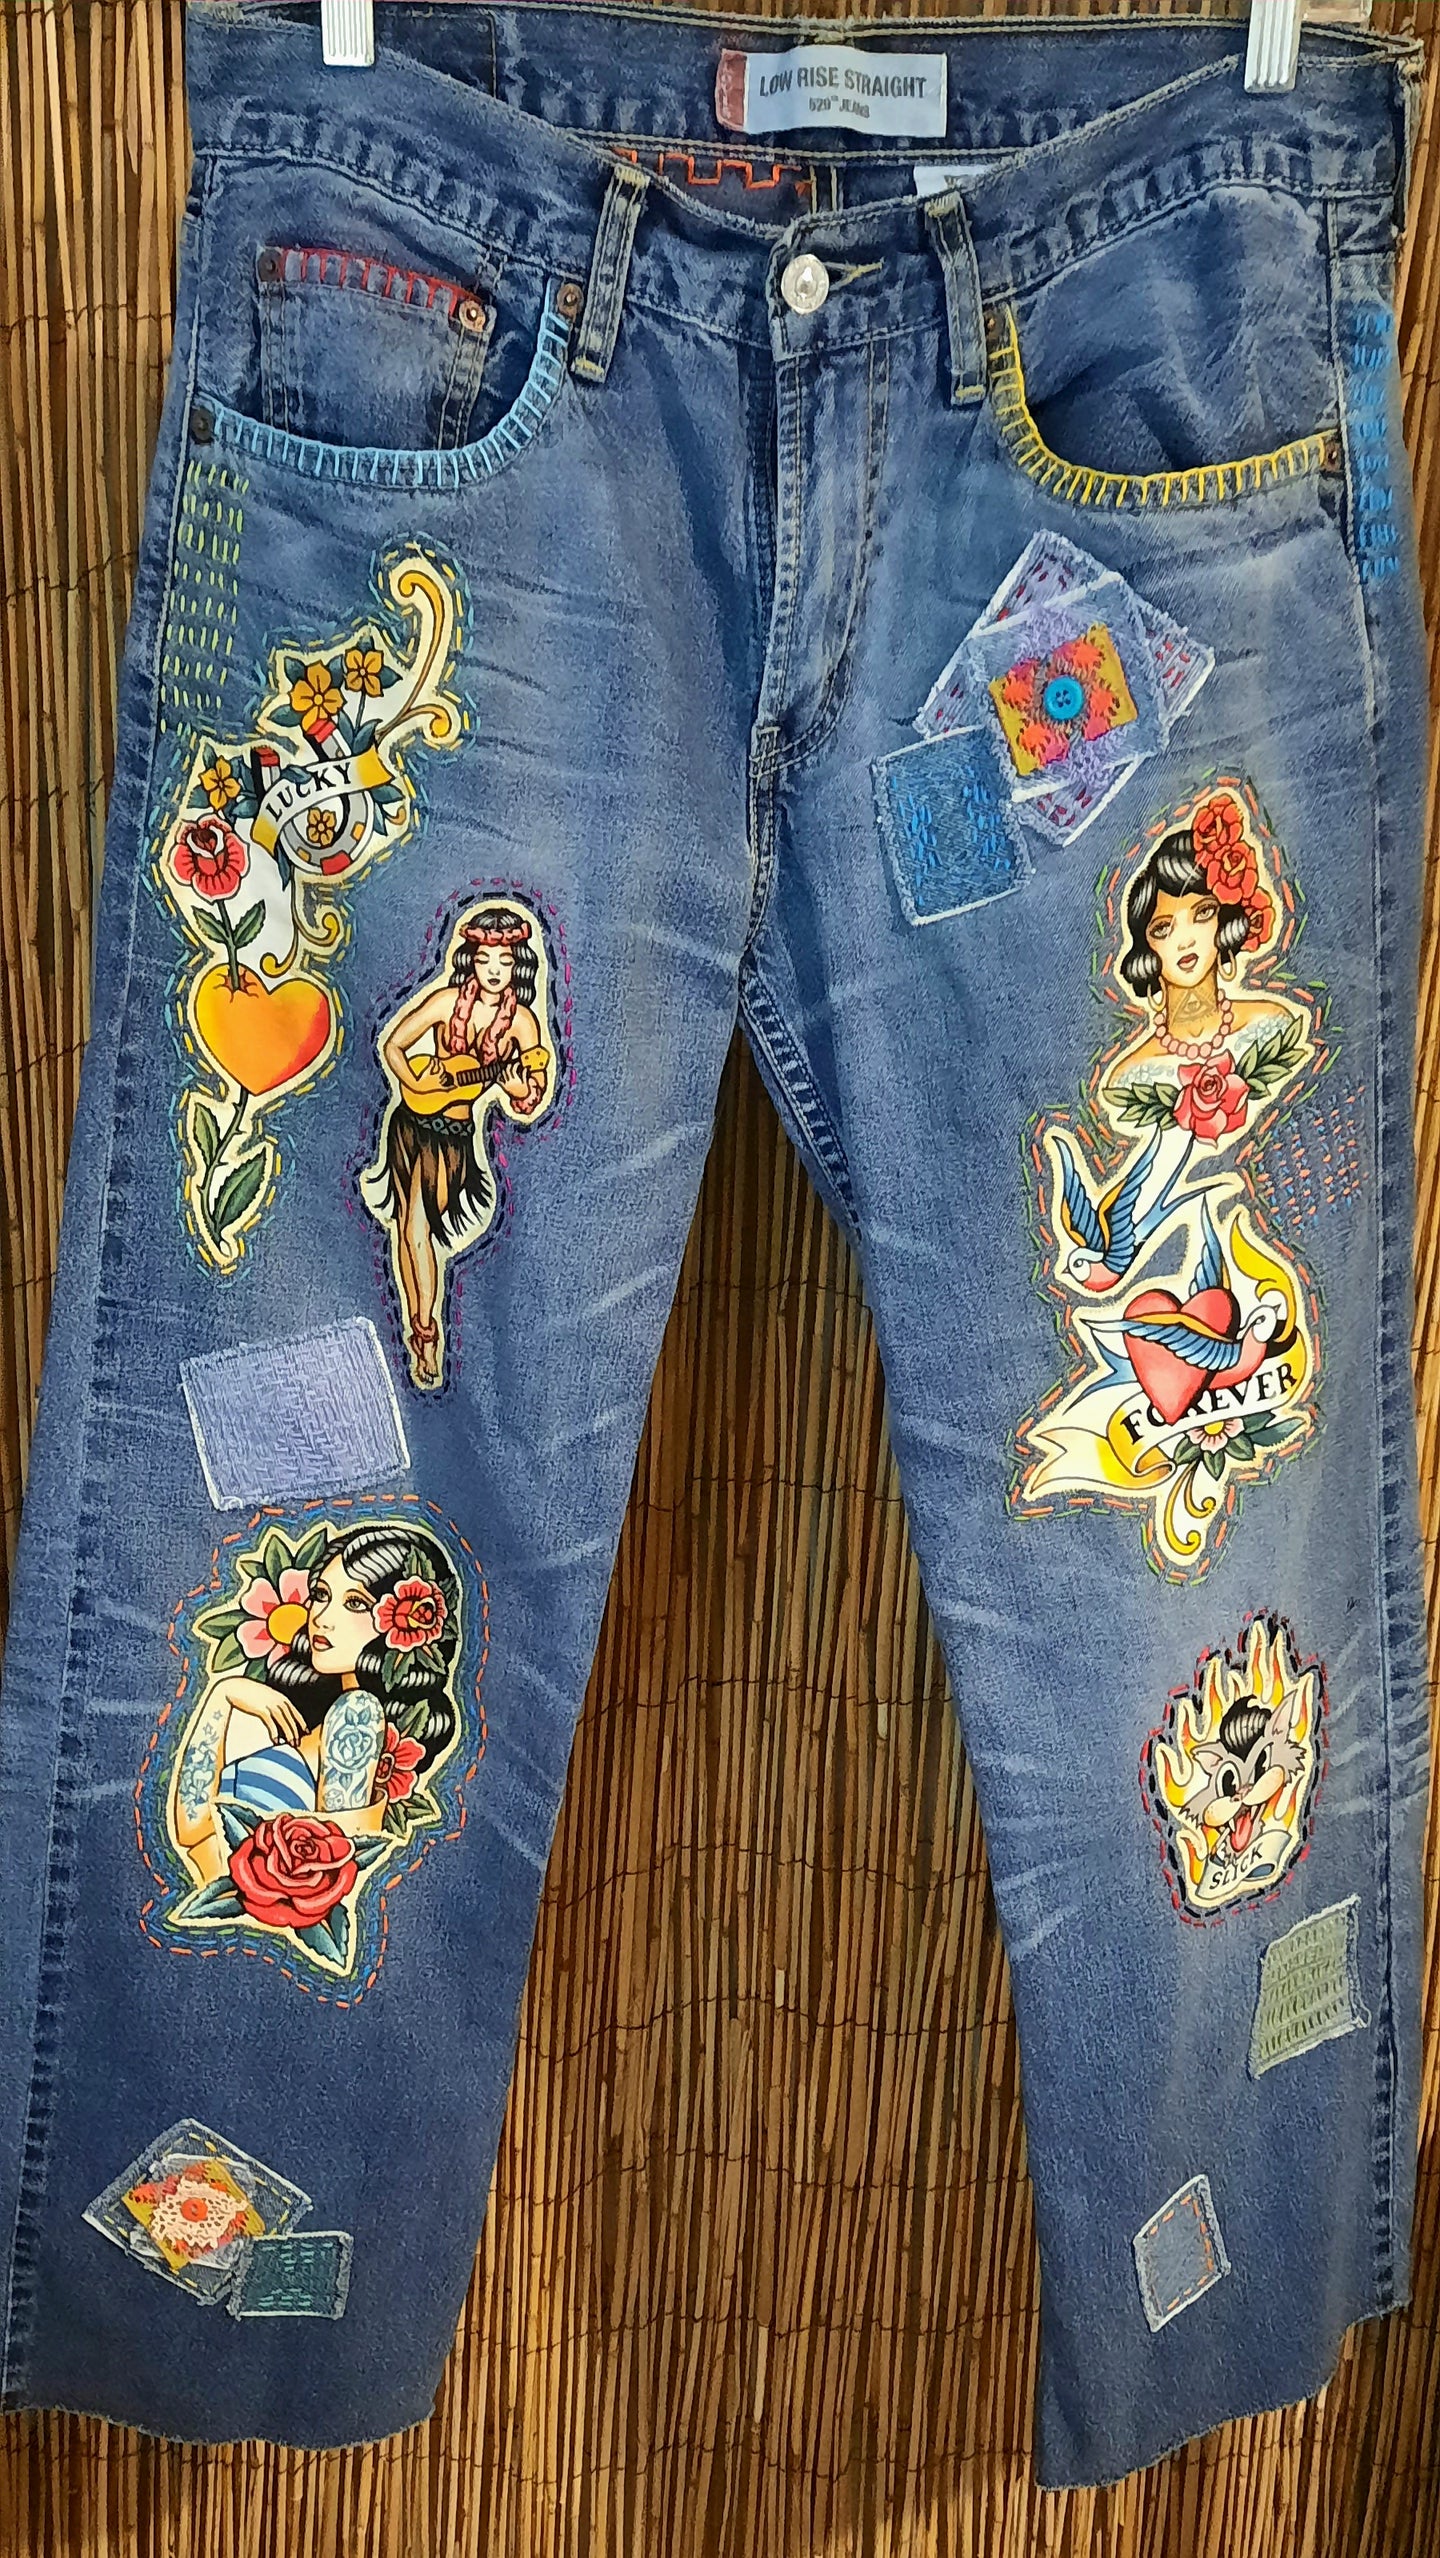 Upcycled/Repurposed Levi's Tattoo Jeans